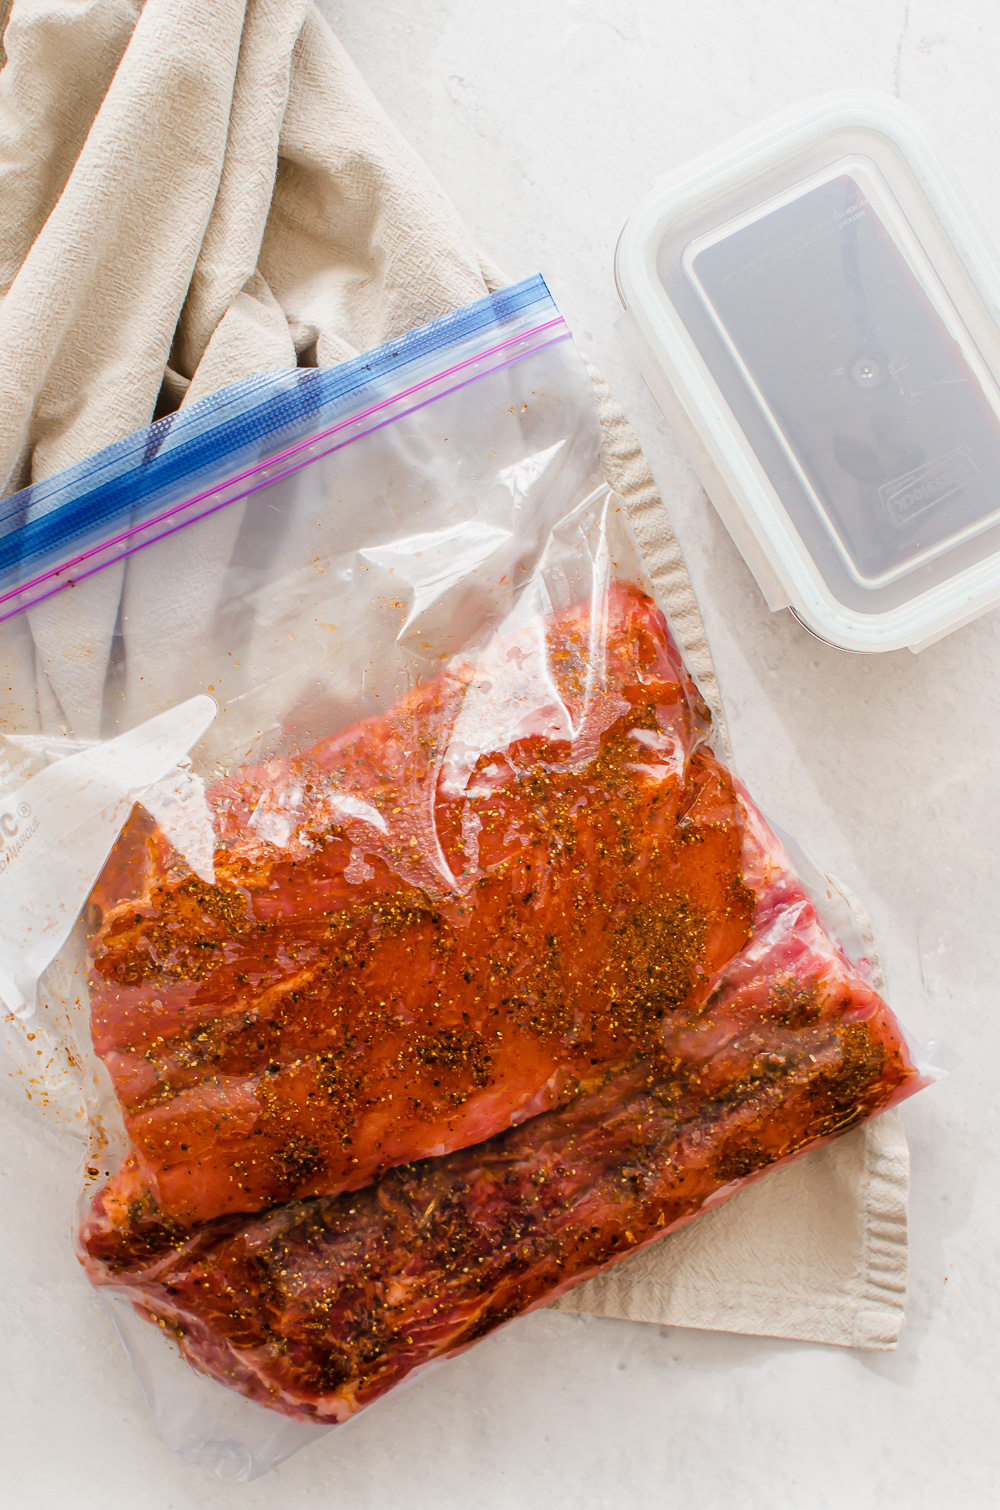 Baby back ribs with a rub in a freezer bag.